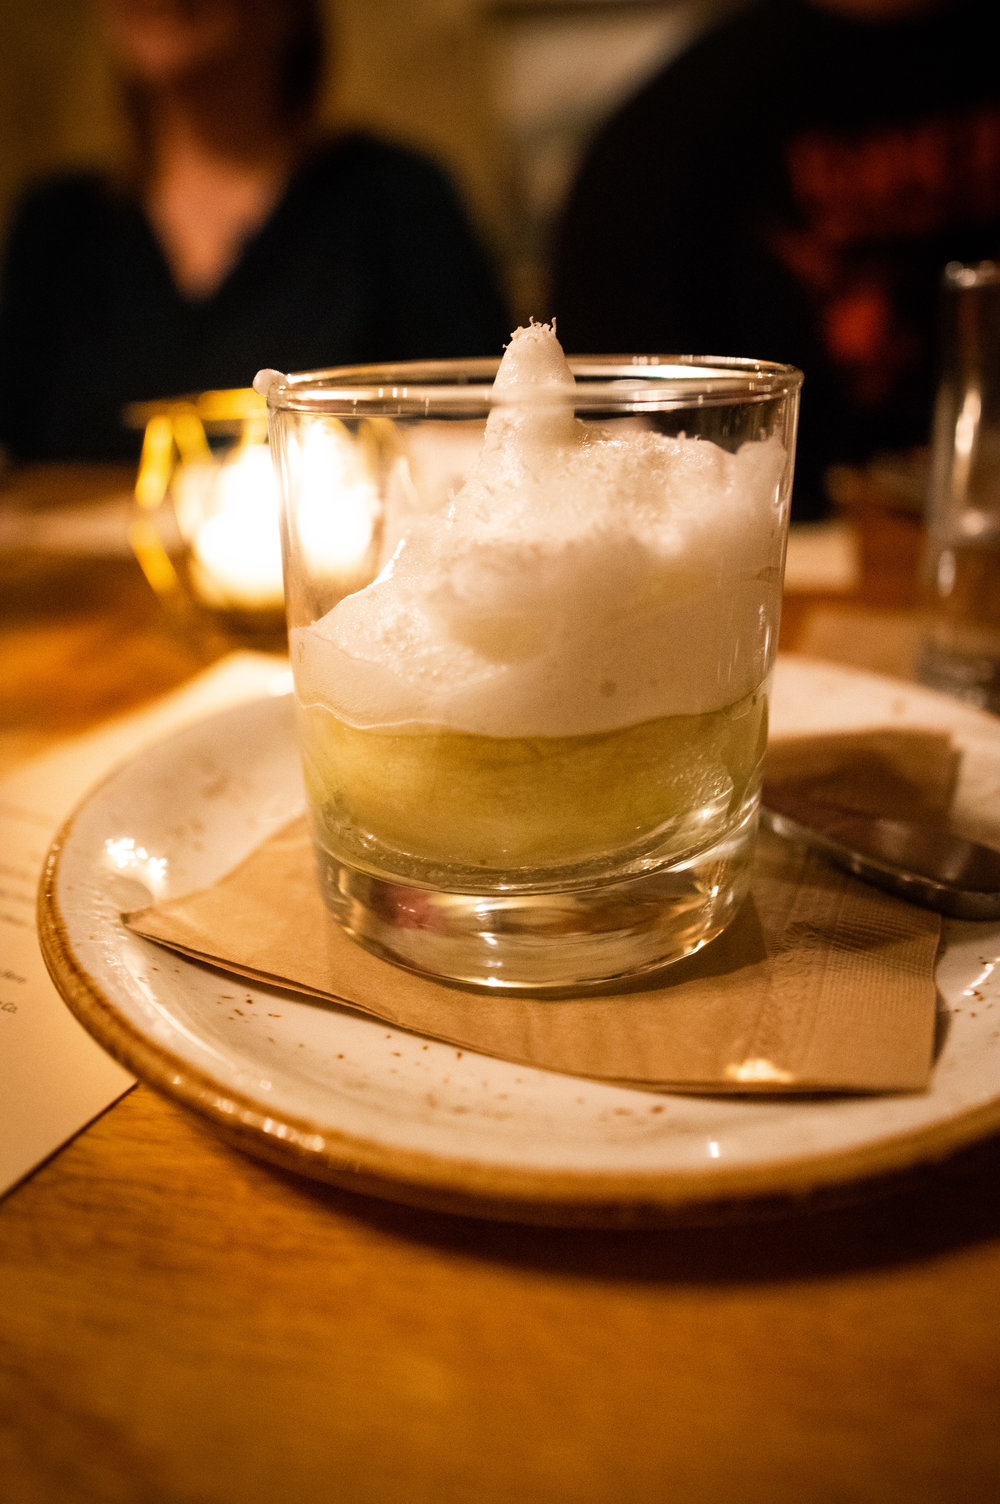  The sixth and final course - Roasted Apples topped with champagne foam 